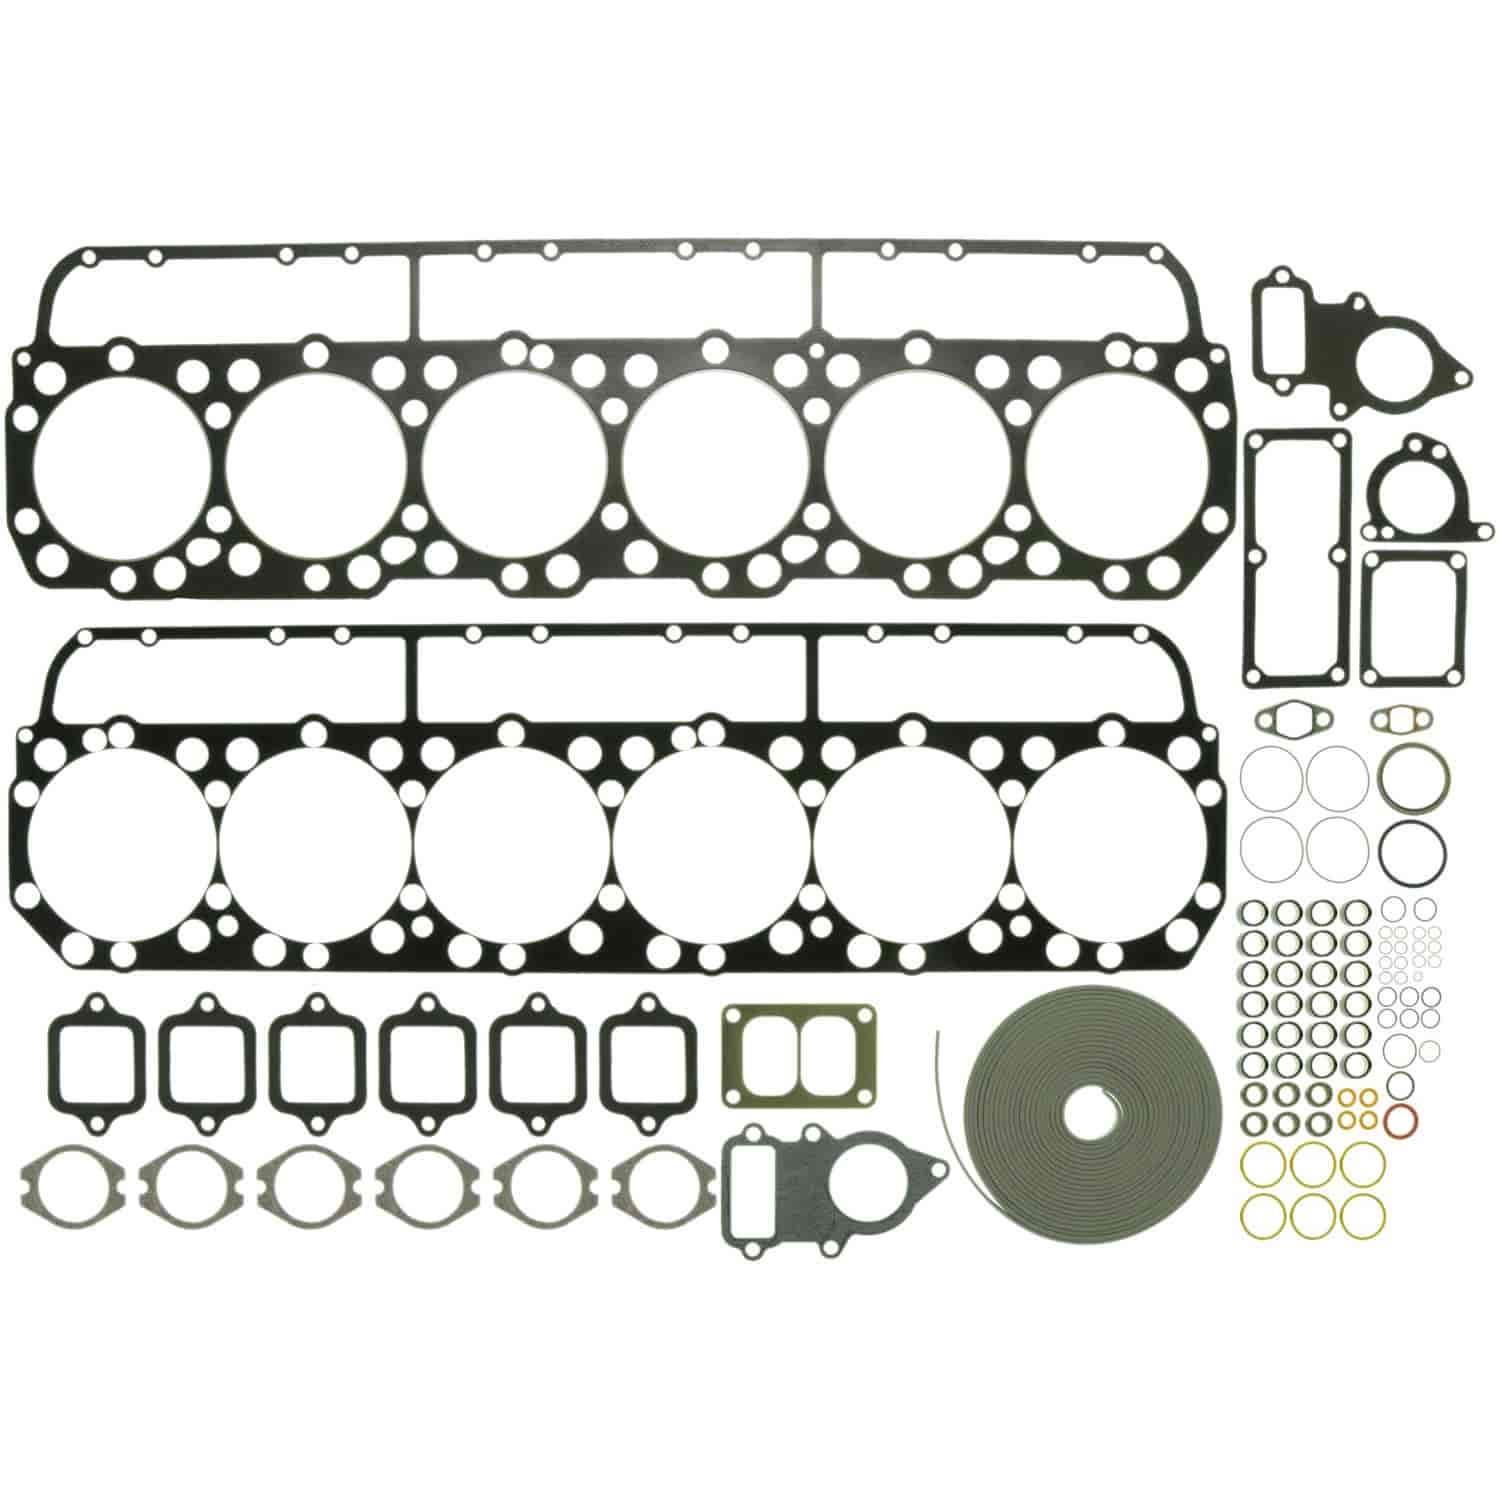 Cylinder Head Set 3406 Caterpillar Head Set See Product Bulletin for full listing